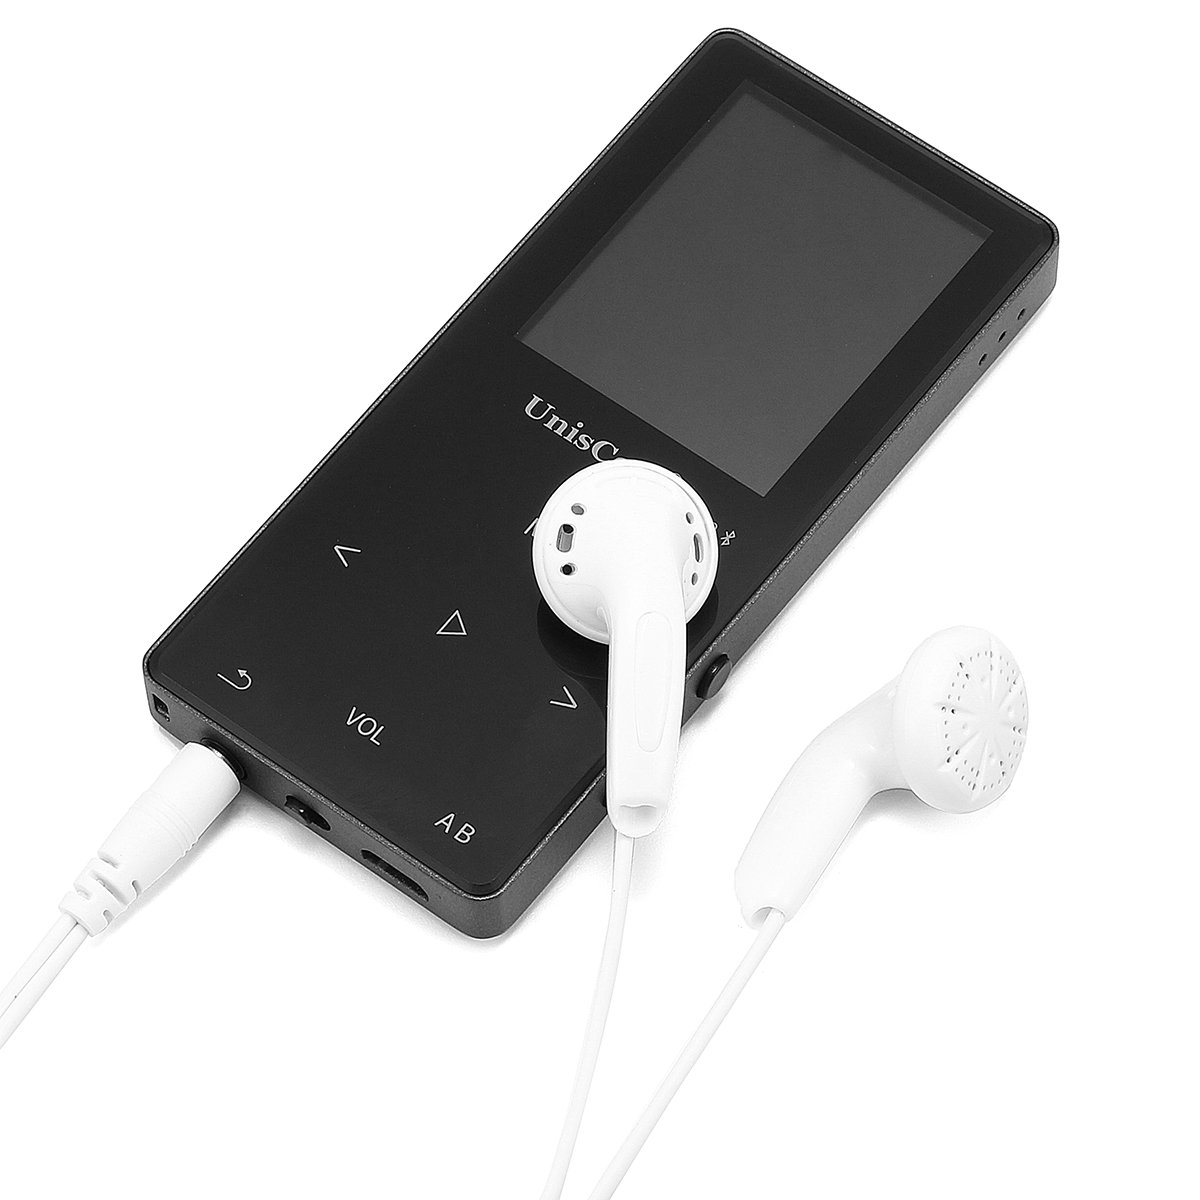 Uniscom 8G 1.8 Inch Screen bluetooth Lossless HIFI MP3 Music Player Support A-B Repeat Voice Record 2